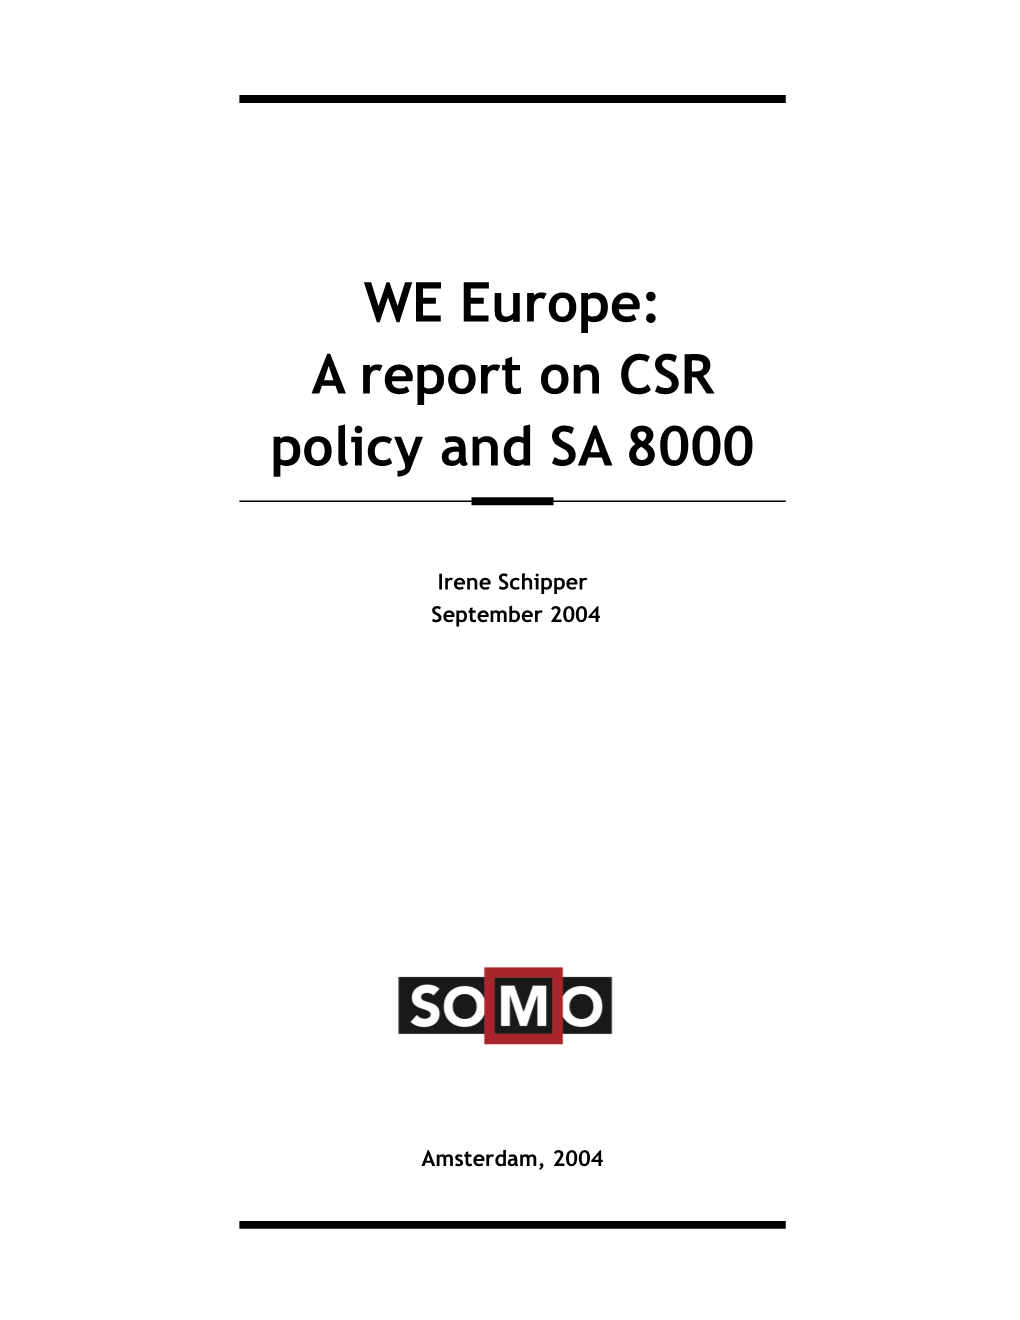 WE Europe: a Report on CSR Policy and SA 8000